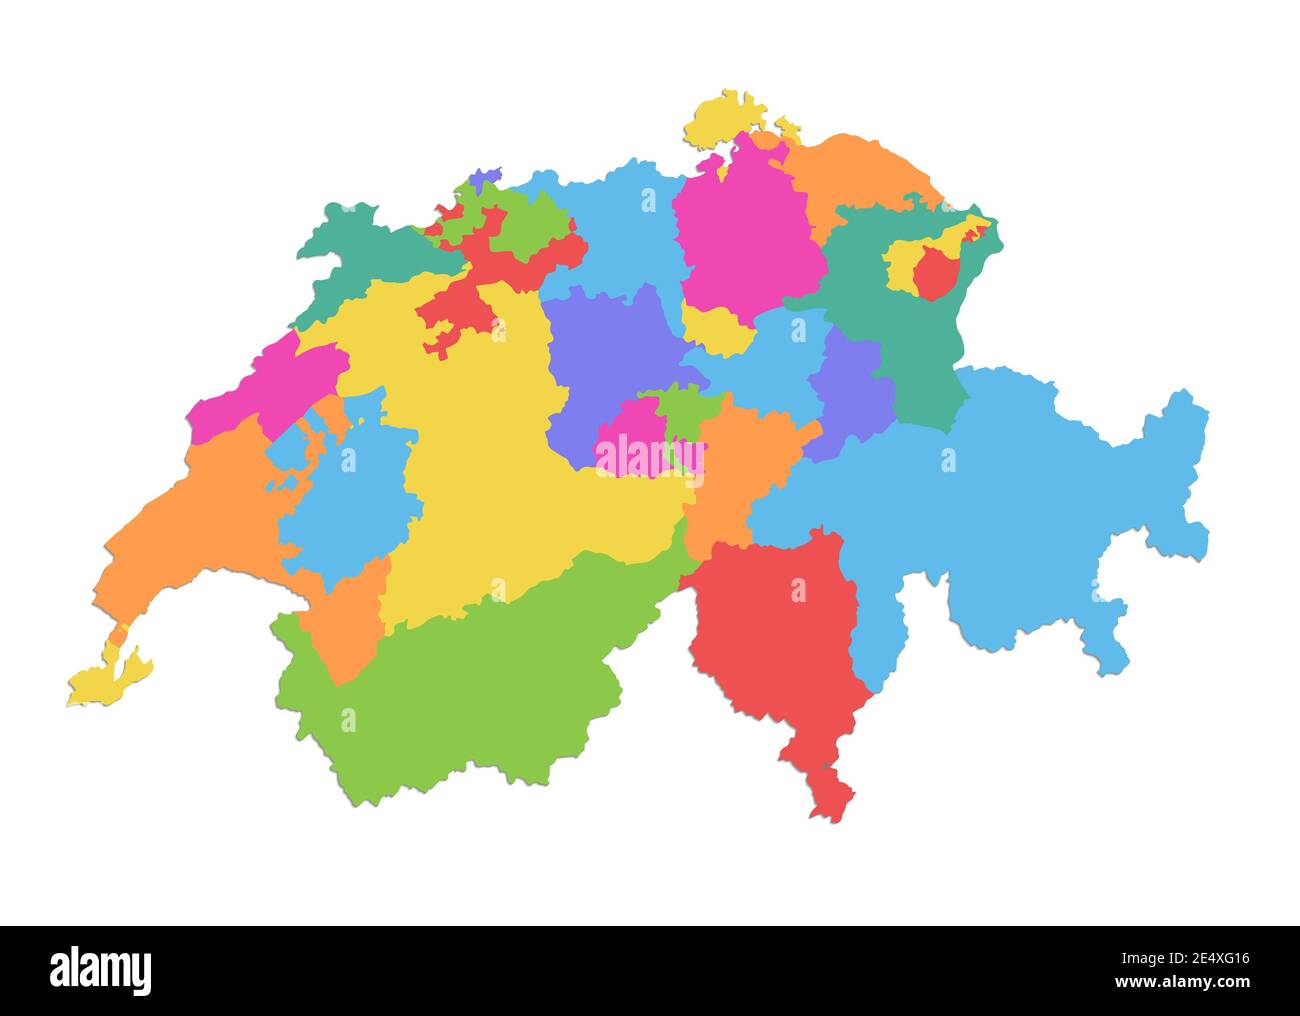 Switzerland map, administrative division, separate individual regions, color map isolated on white background blank Stock Photo